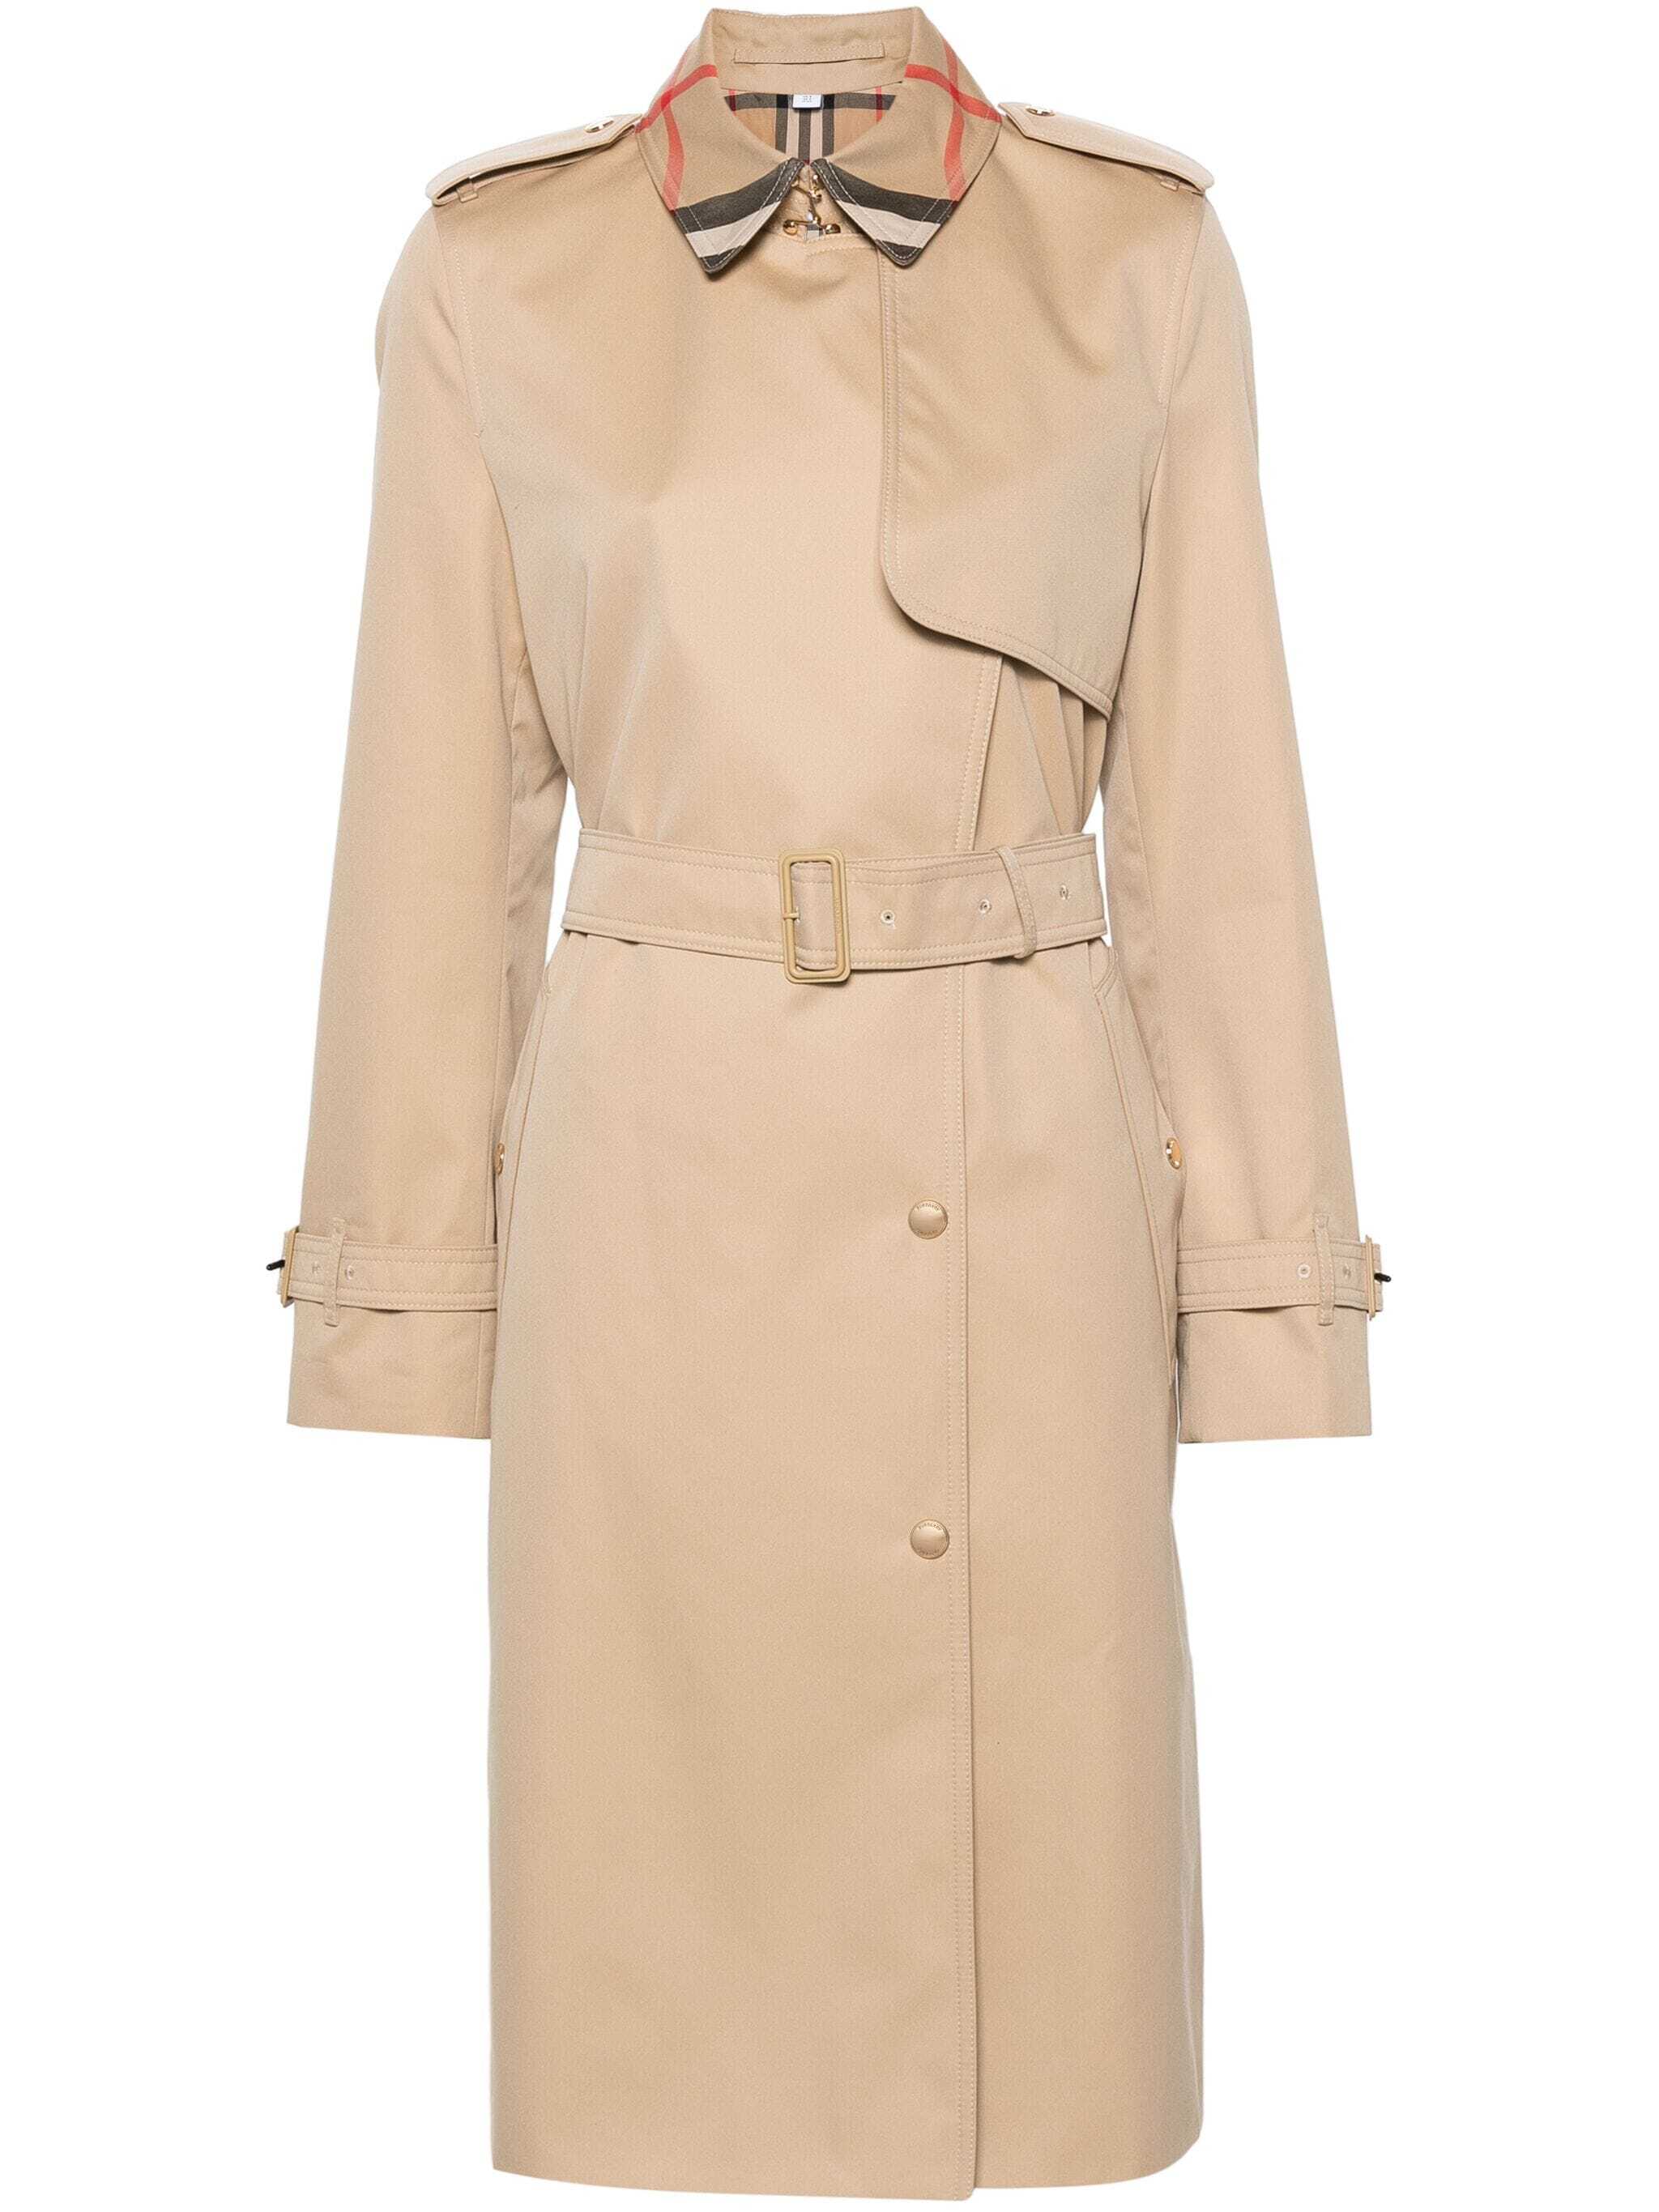 Check details trench coat